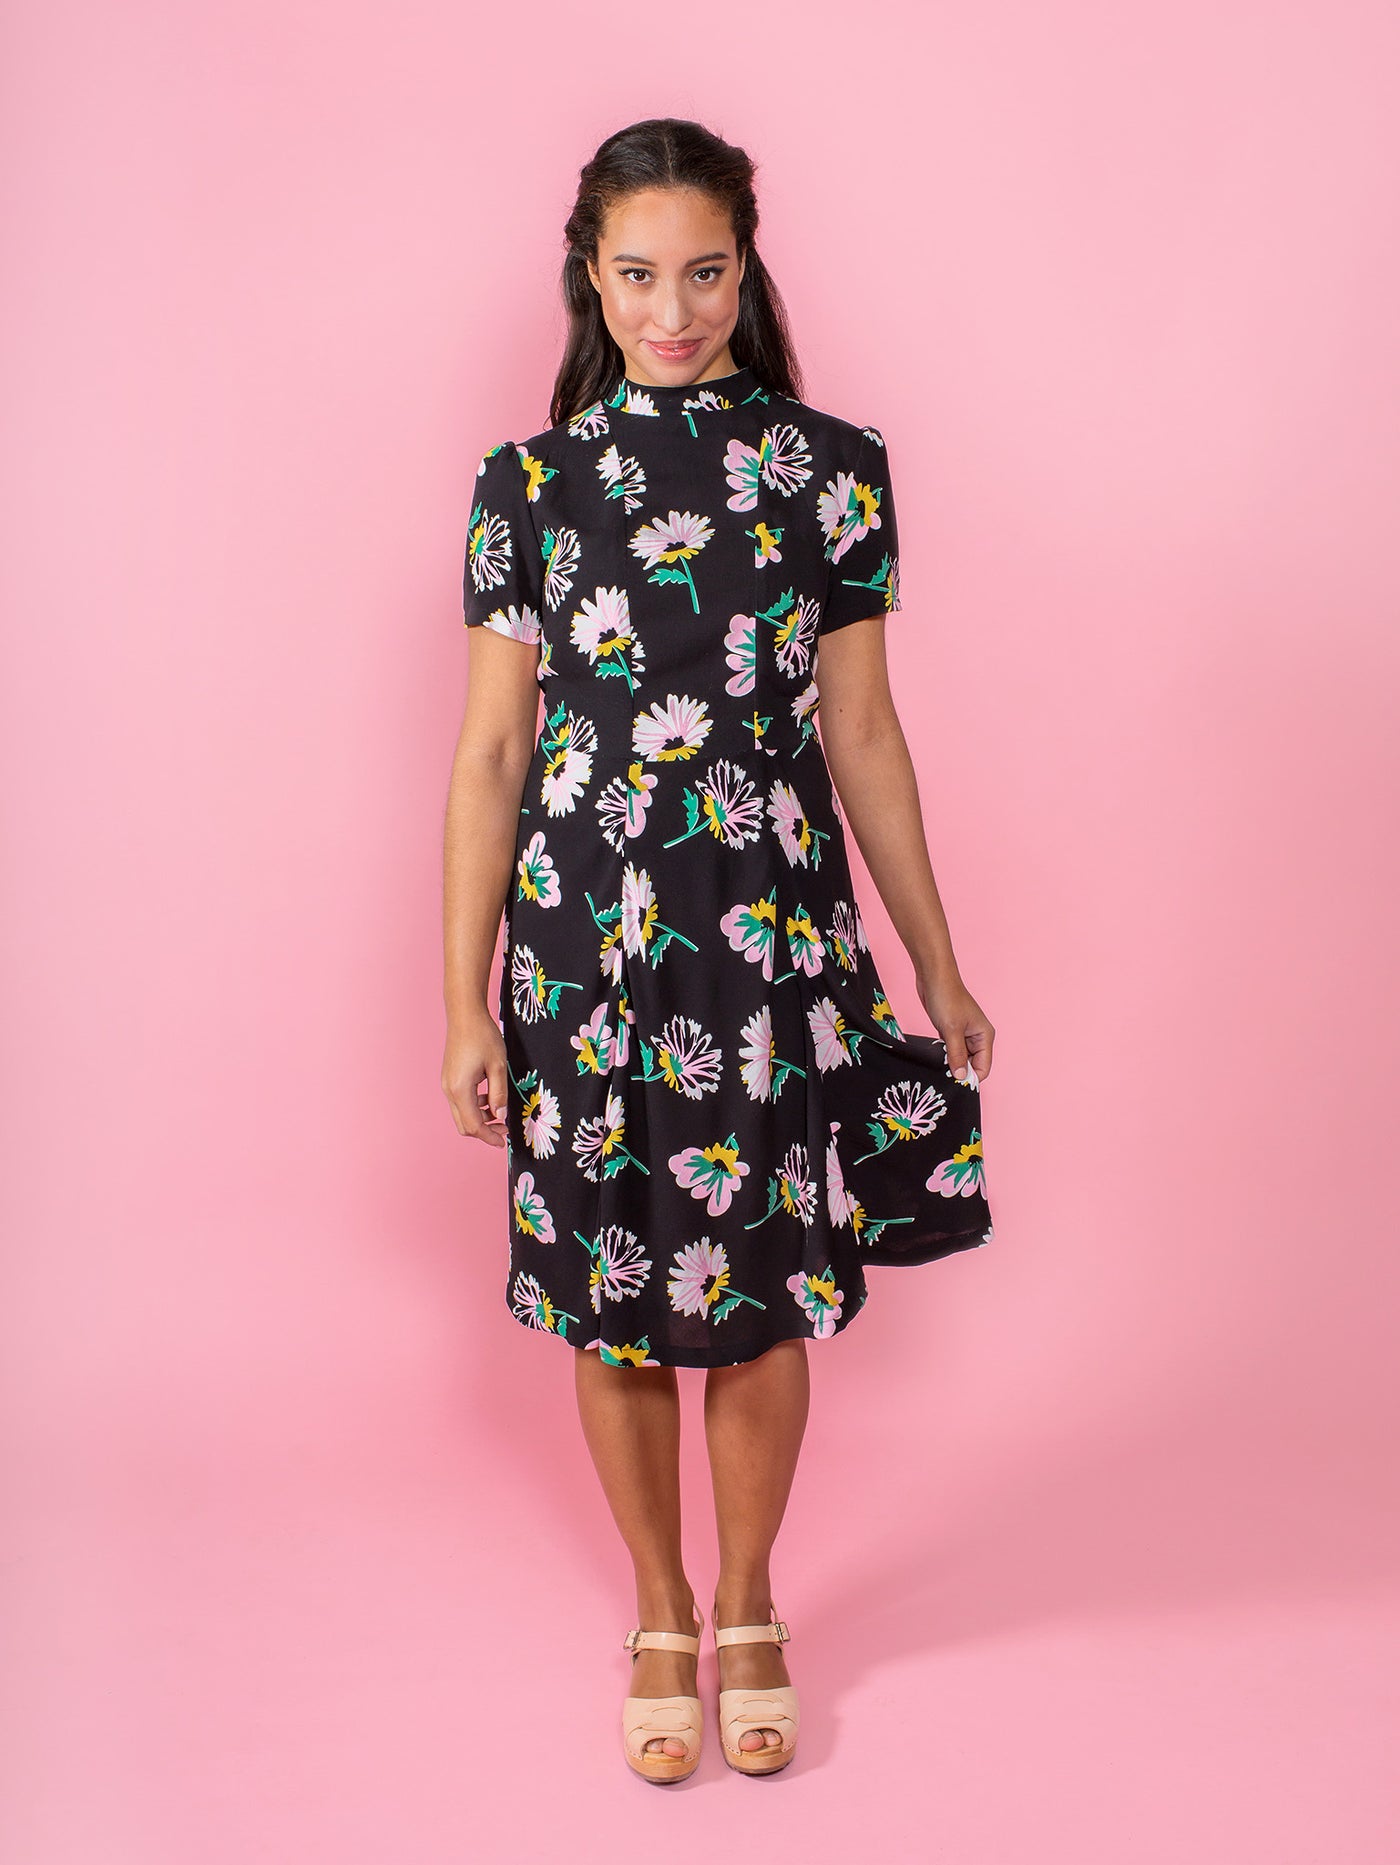 Tilly and the Buttons Martha dress sewing pattern. Easy casual dress pattern.